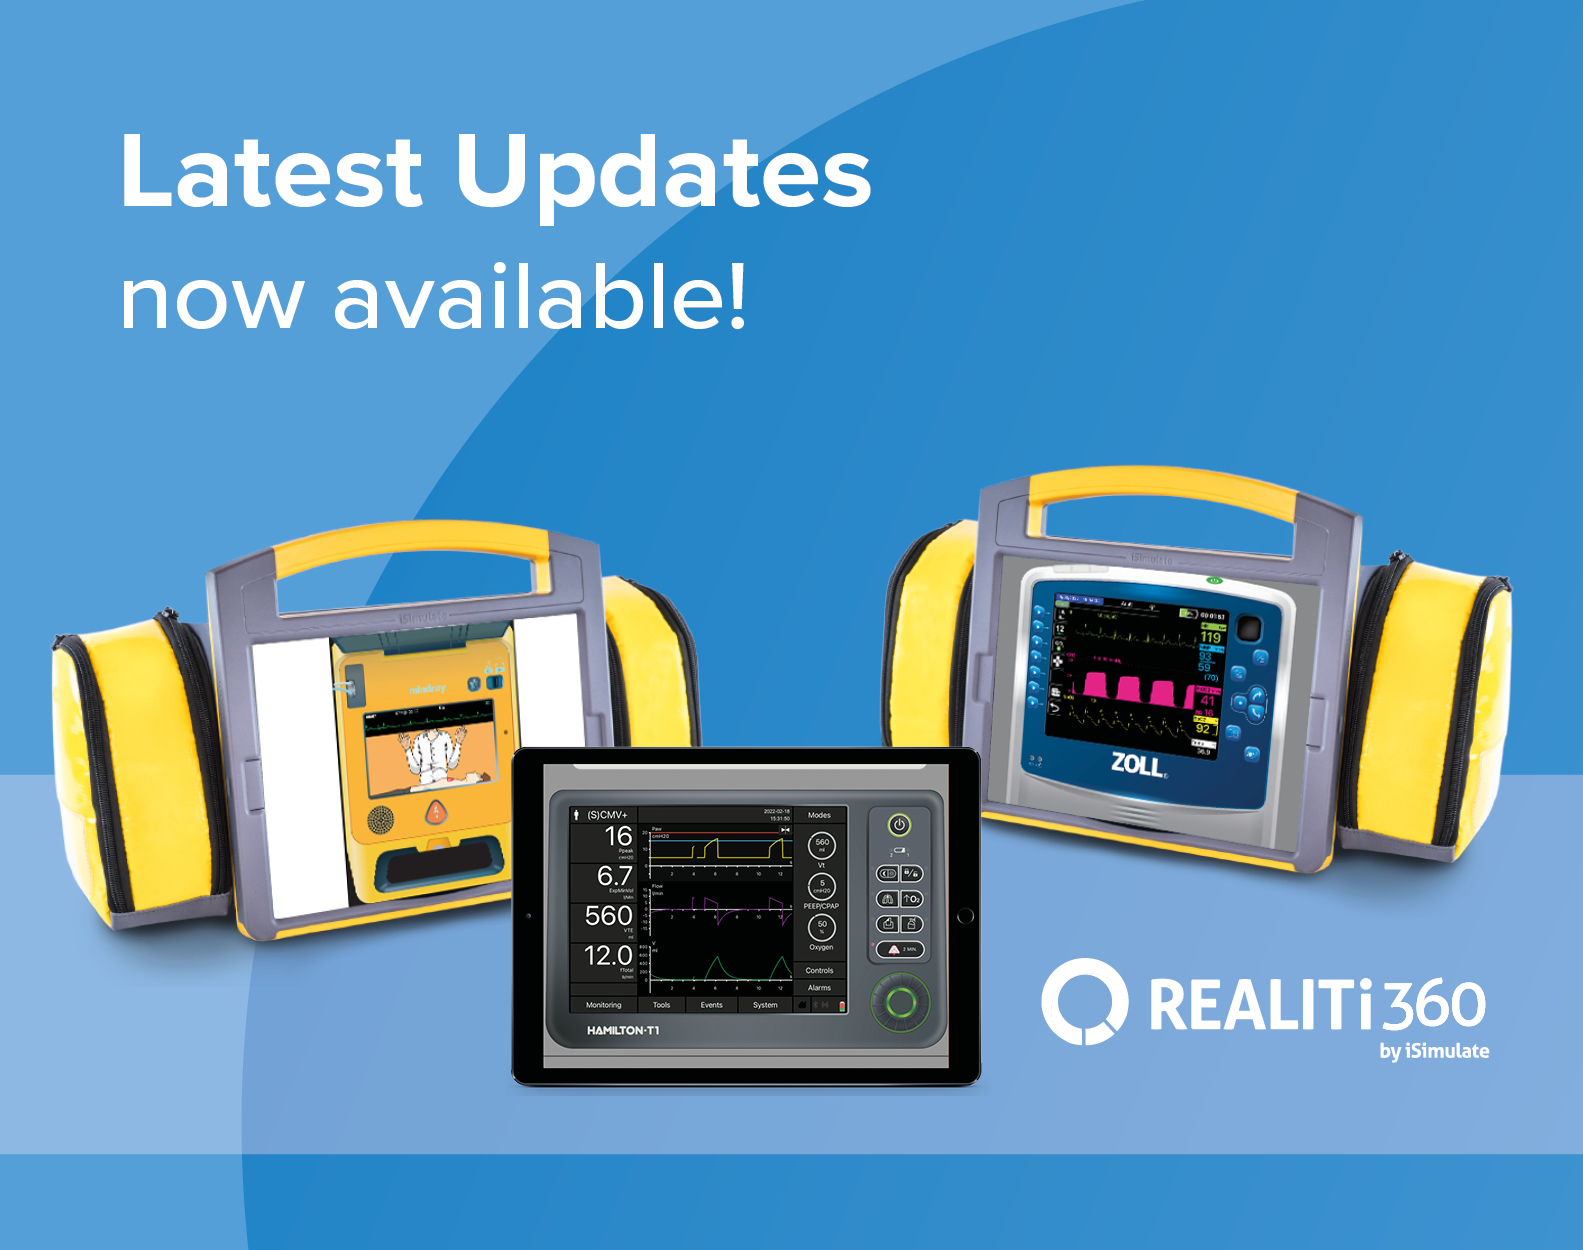 REALITi 360 Version Updates come packed with new features